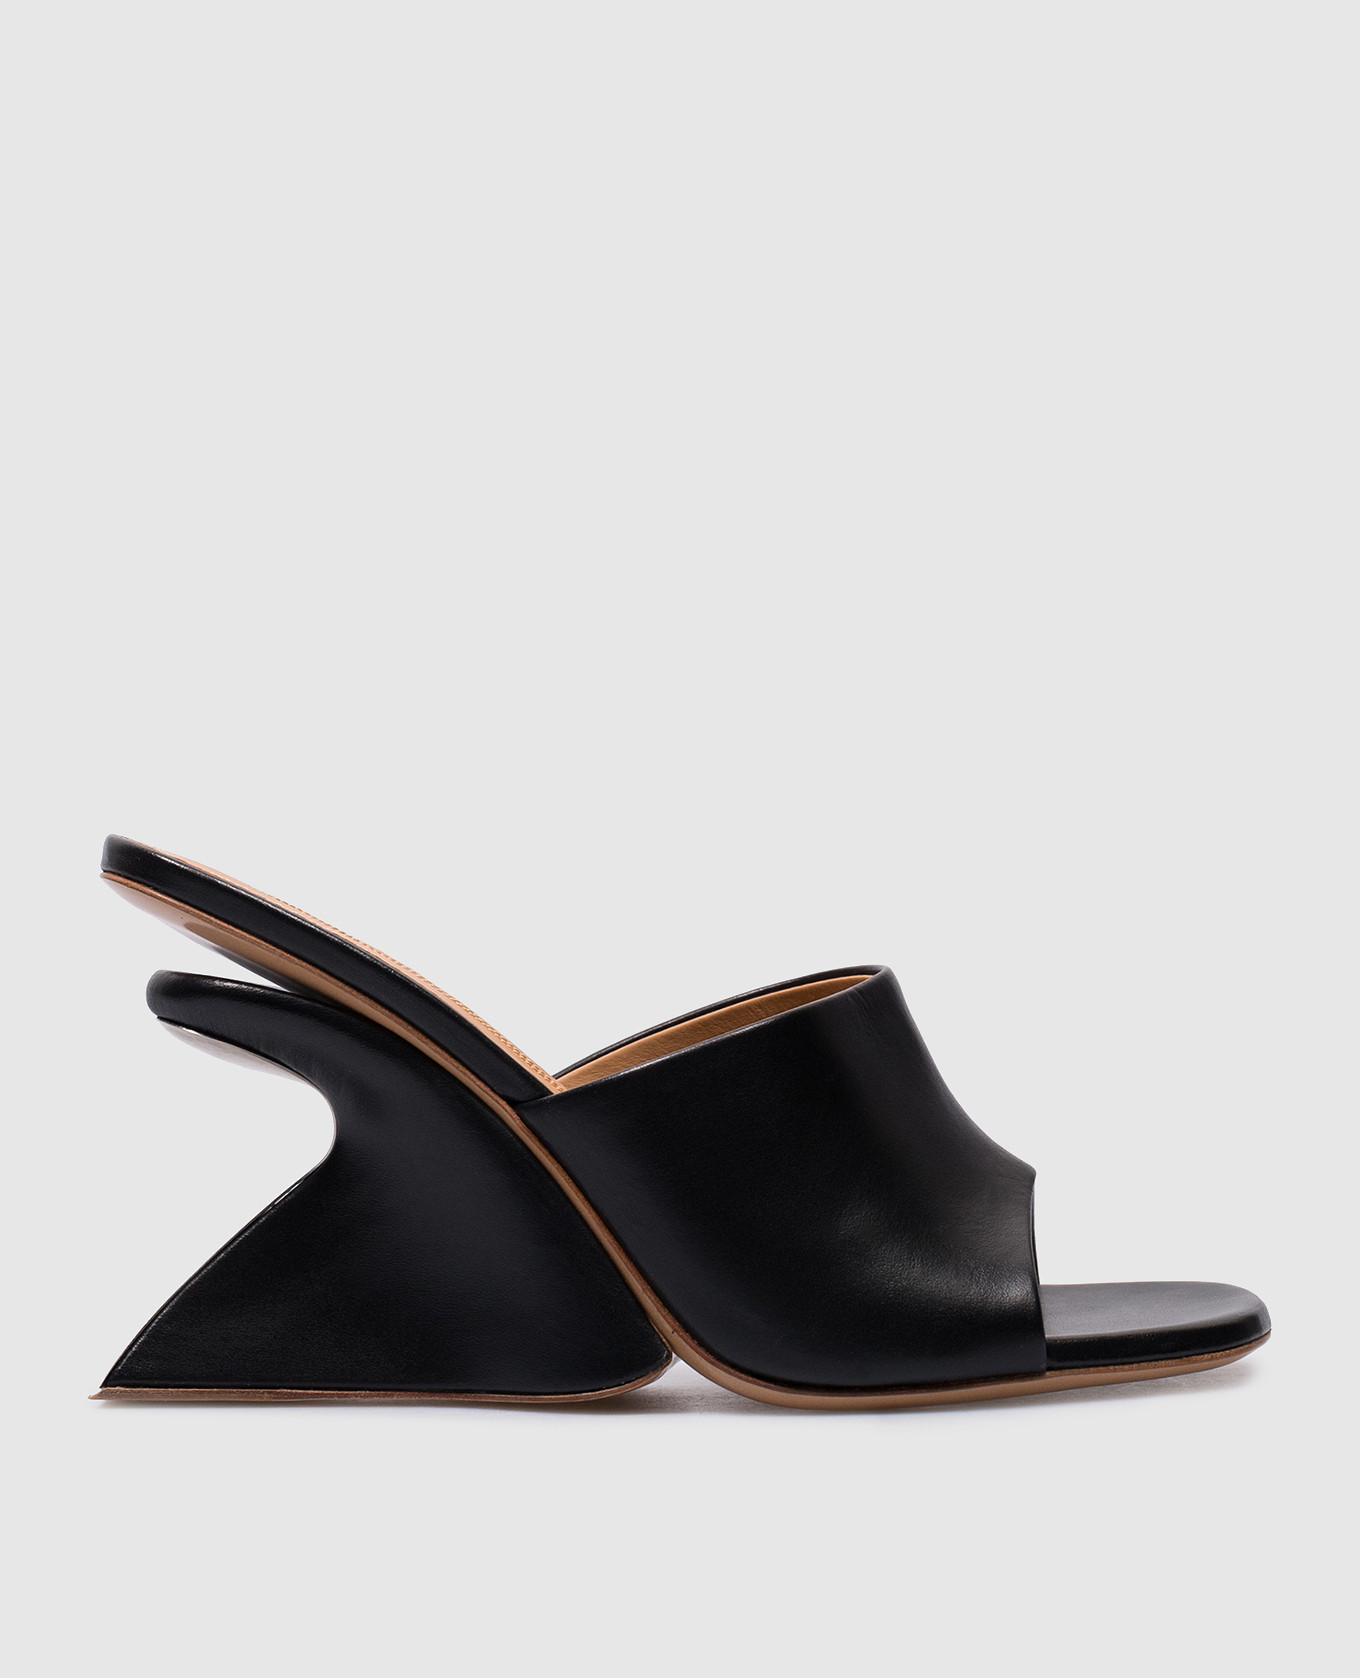 Black leather Jug mules with curved heels